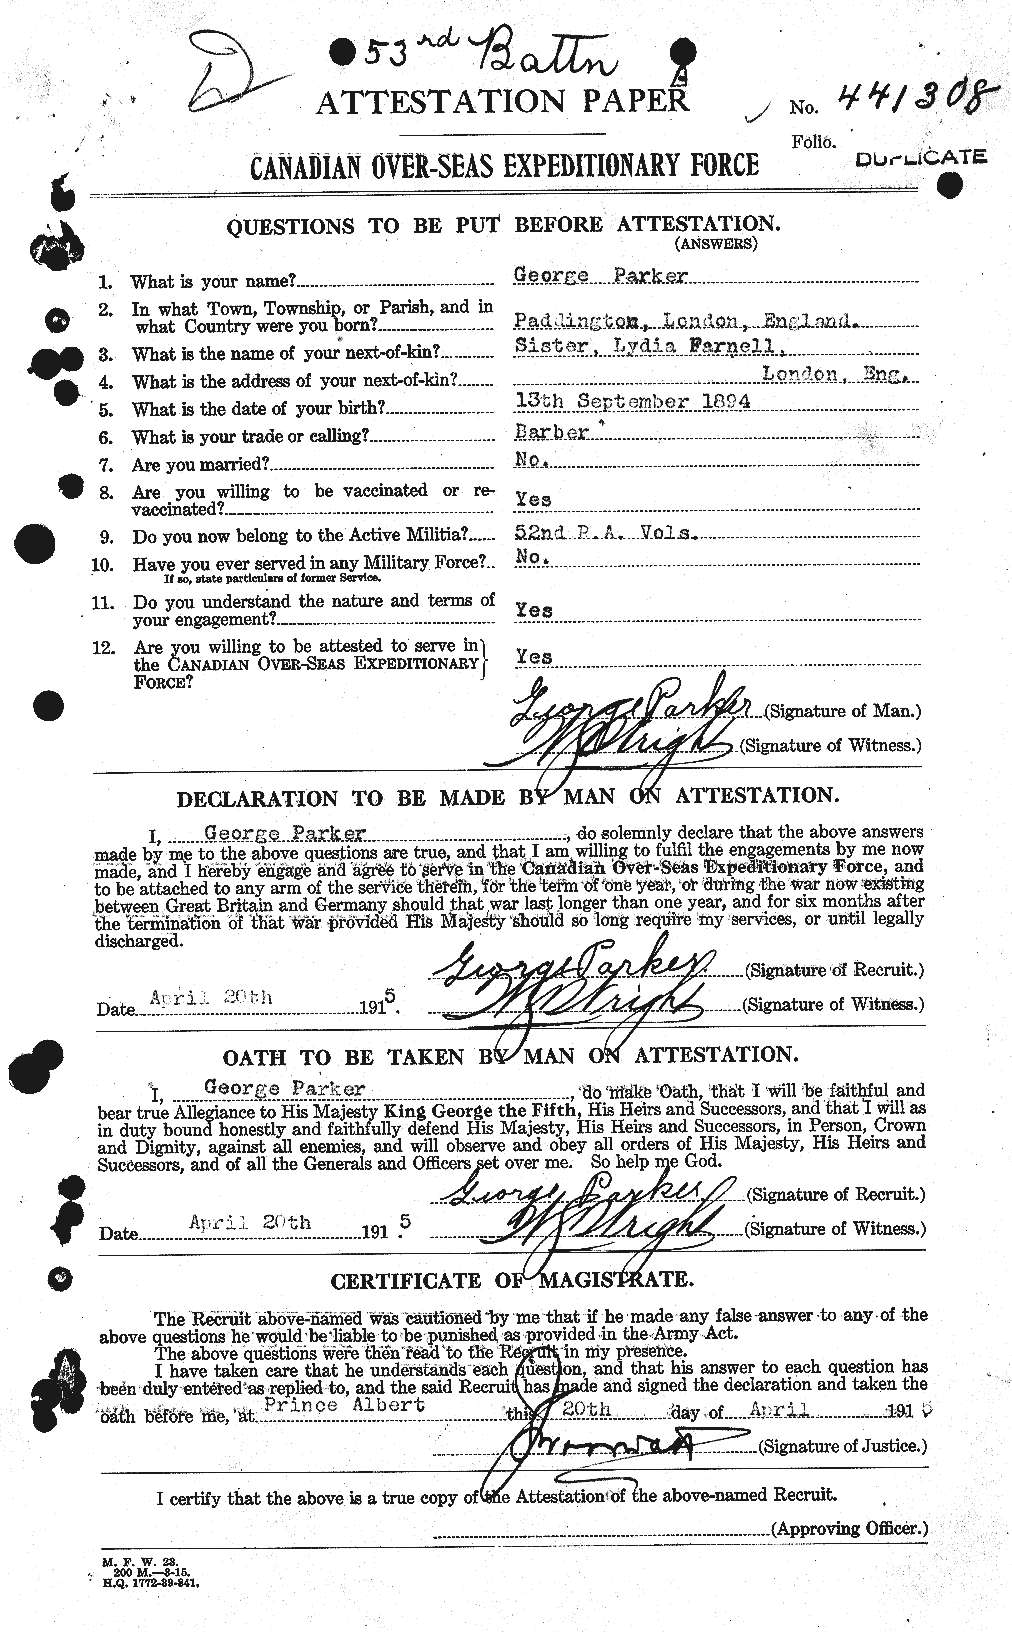 Personnel Records of the First World War - CEF 565246a